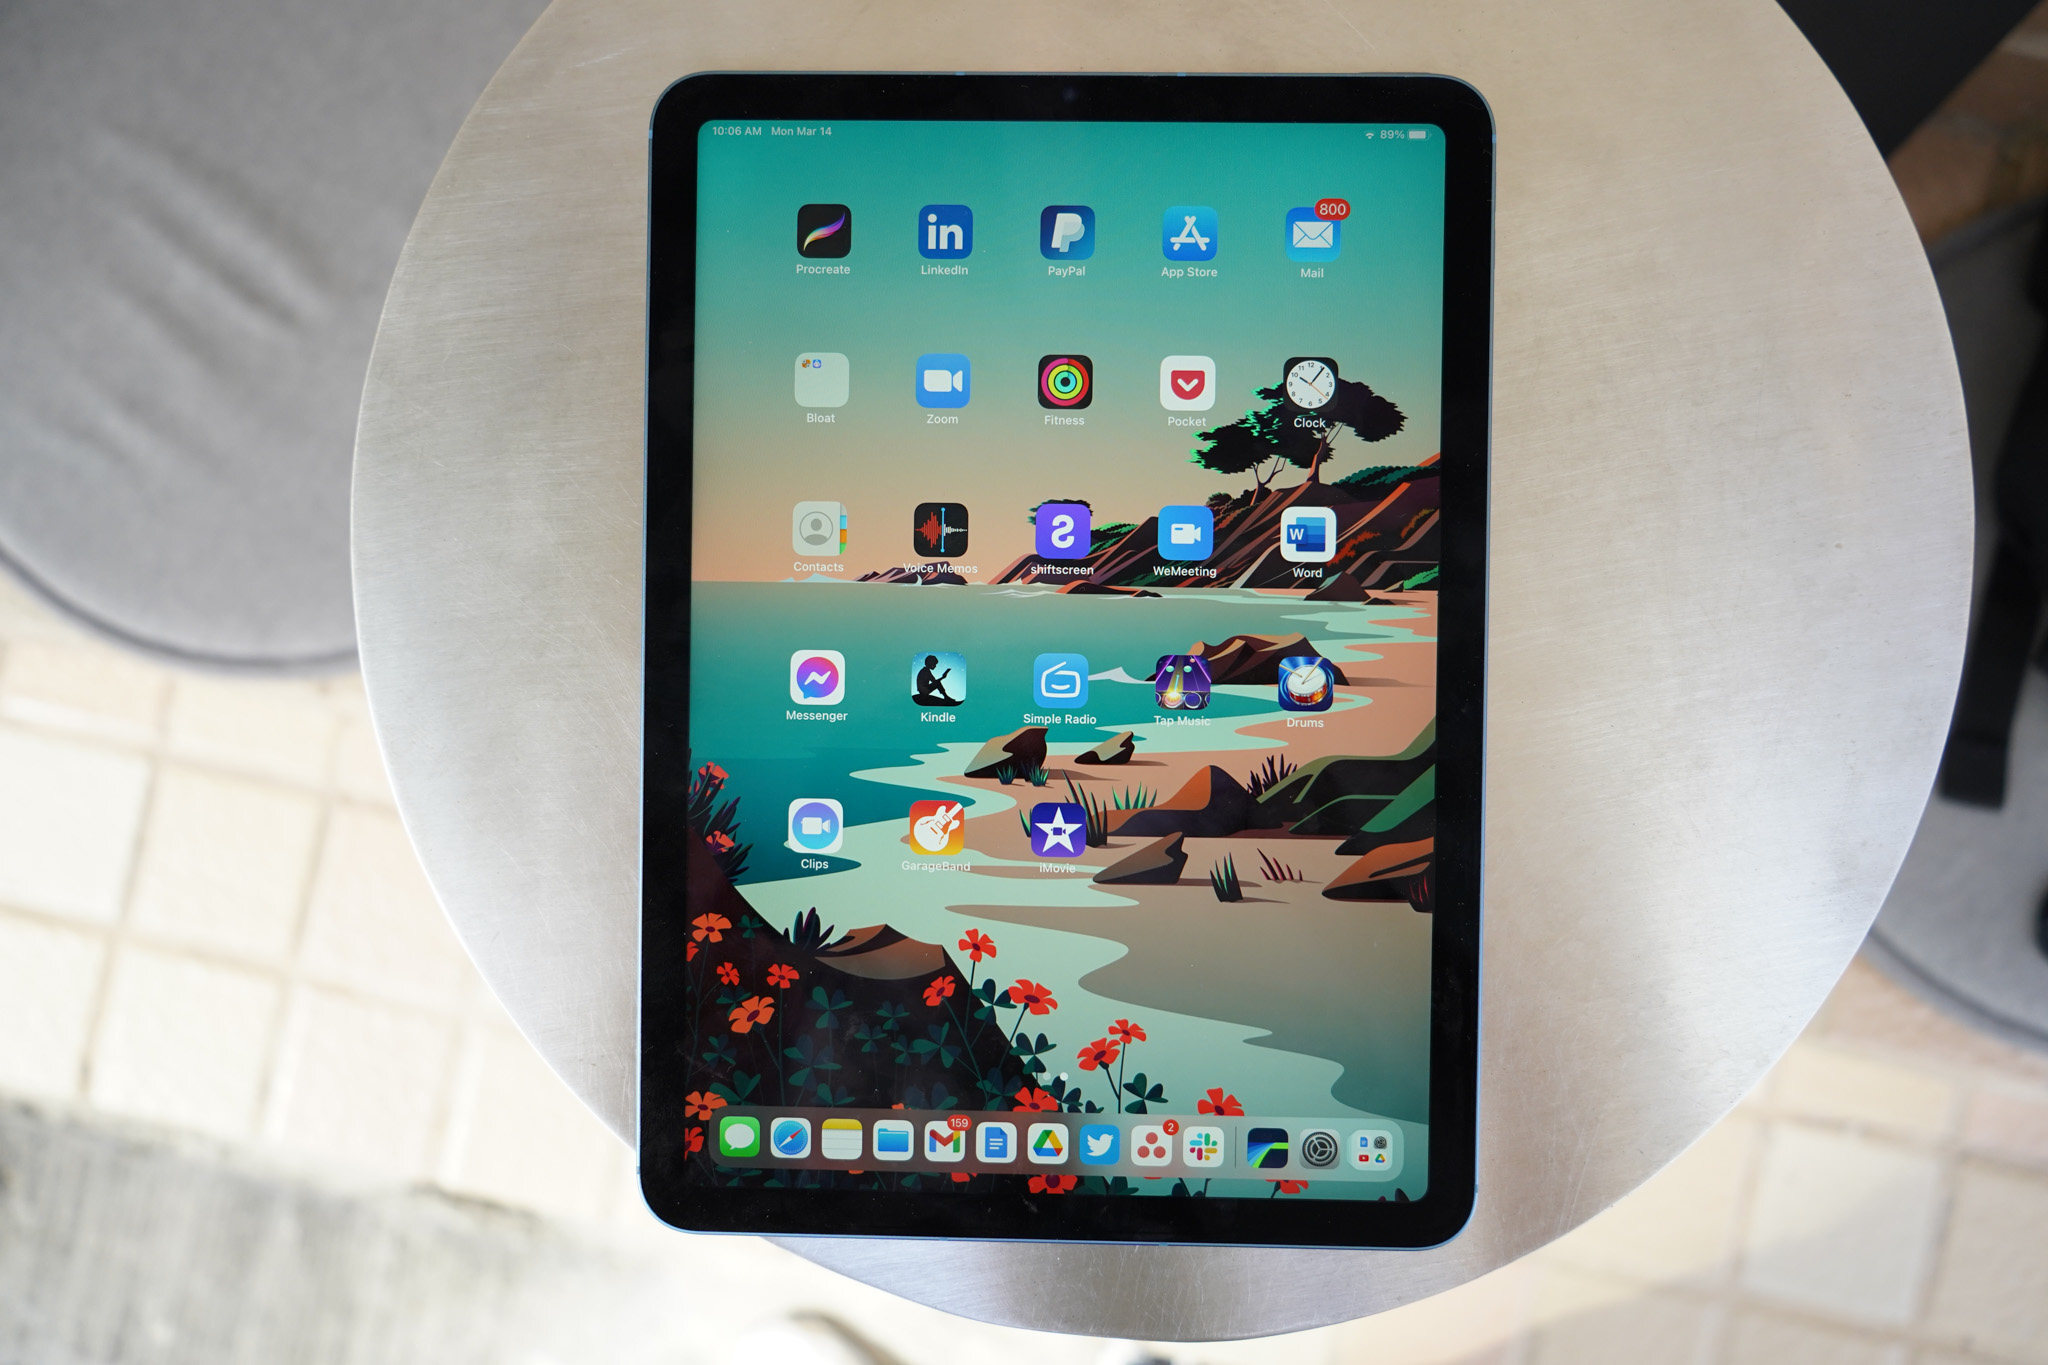 The Apple iPad Air 2022 comes with a 10.9-inch 60Hz LCD display and aluminium chassis with flat sides. Inside there’s the powerful M1 chip, a better front-facing camera, more RAM and software upgrades. Photo: Ben Sin